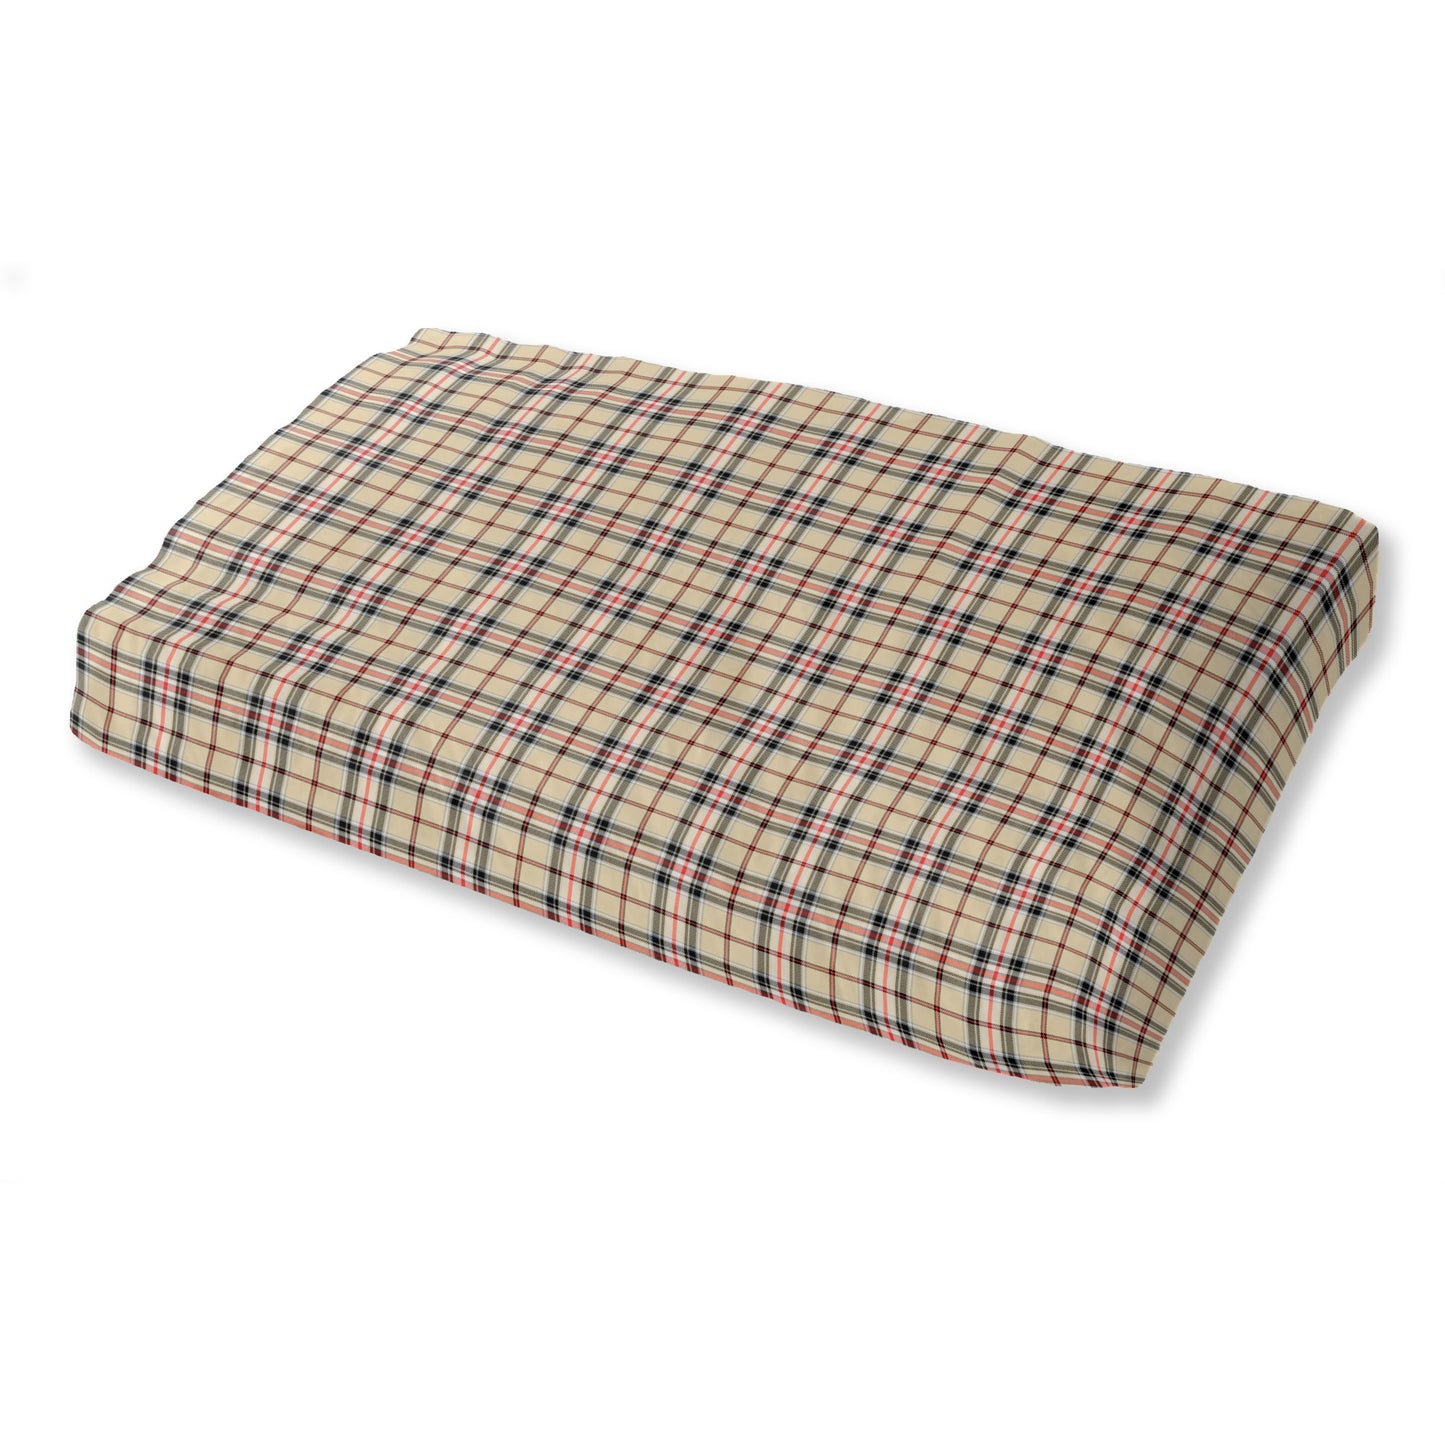 Chic Plaid Pet Bed - shades and stripes of gold, yellow, black, and red. The dominant color in this design is yellow or gold.